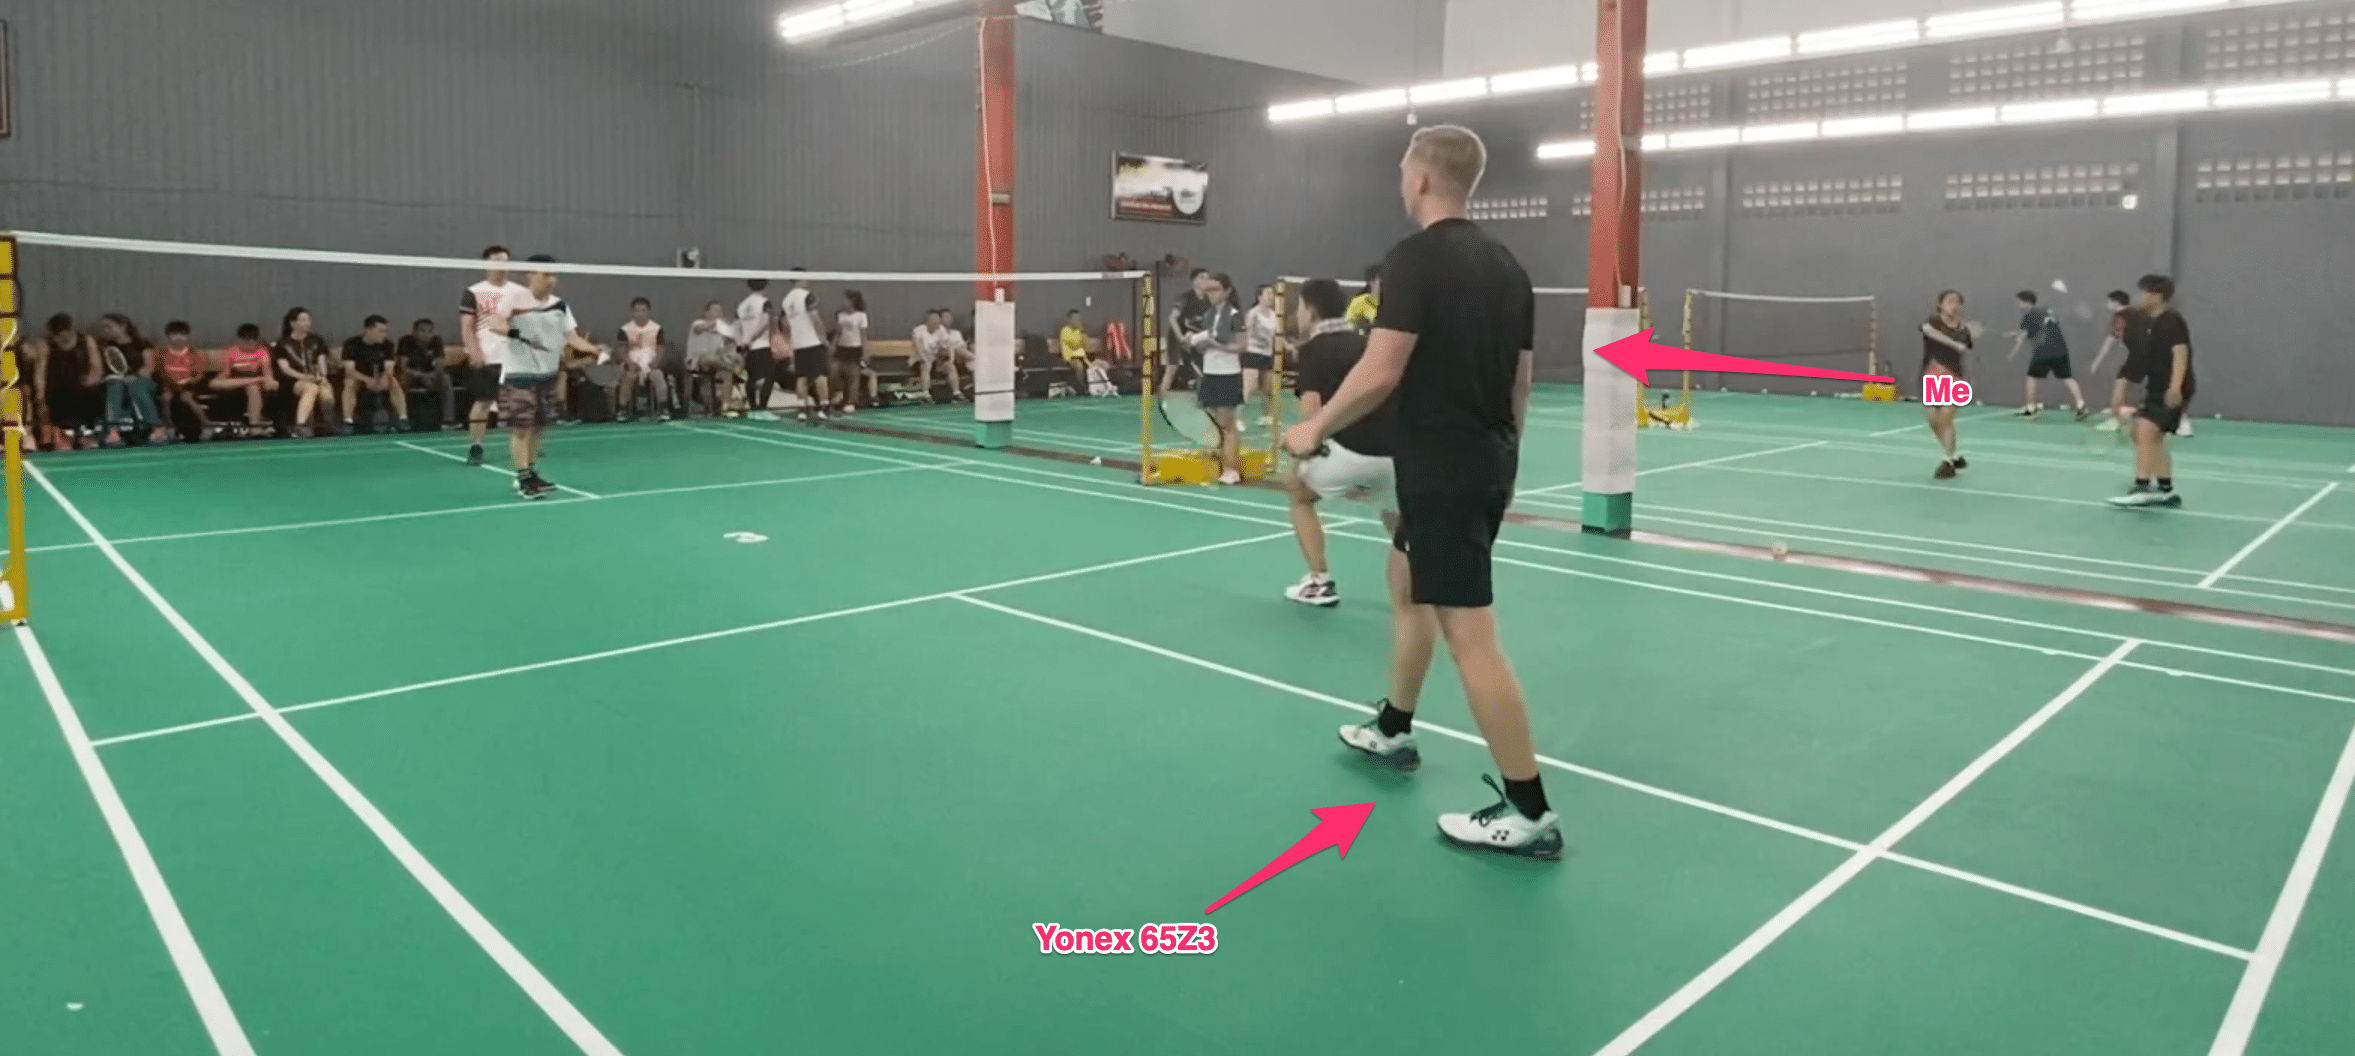 Badminton Court Offers Unusual Experience